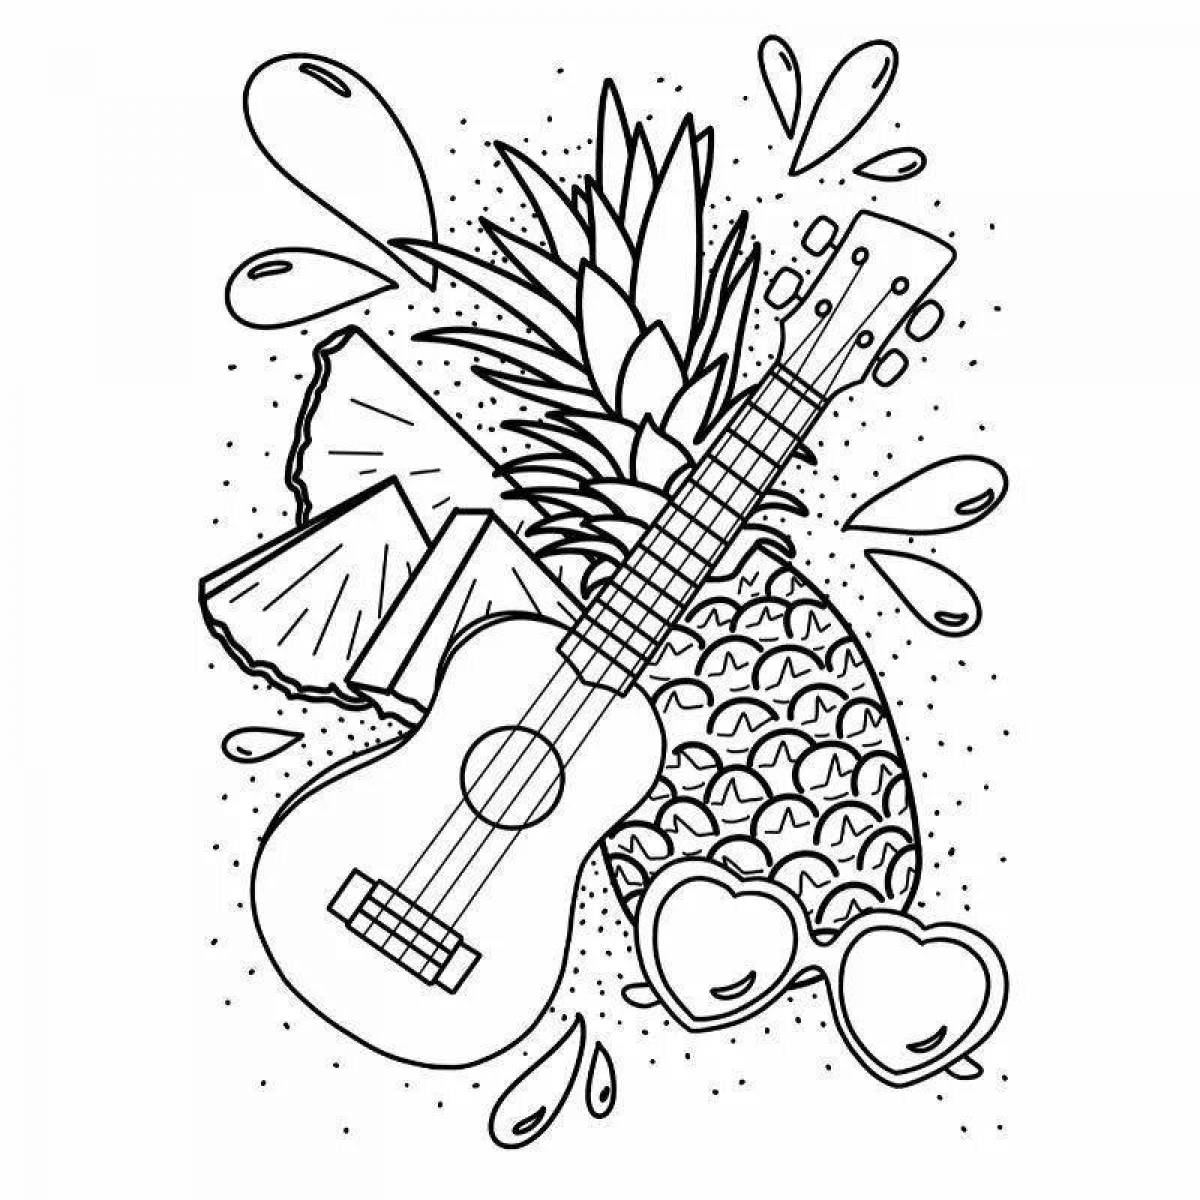 Exciting ukulele coloring book